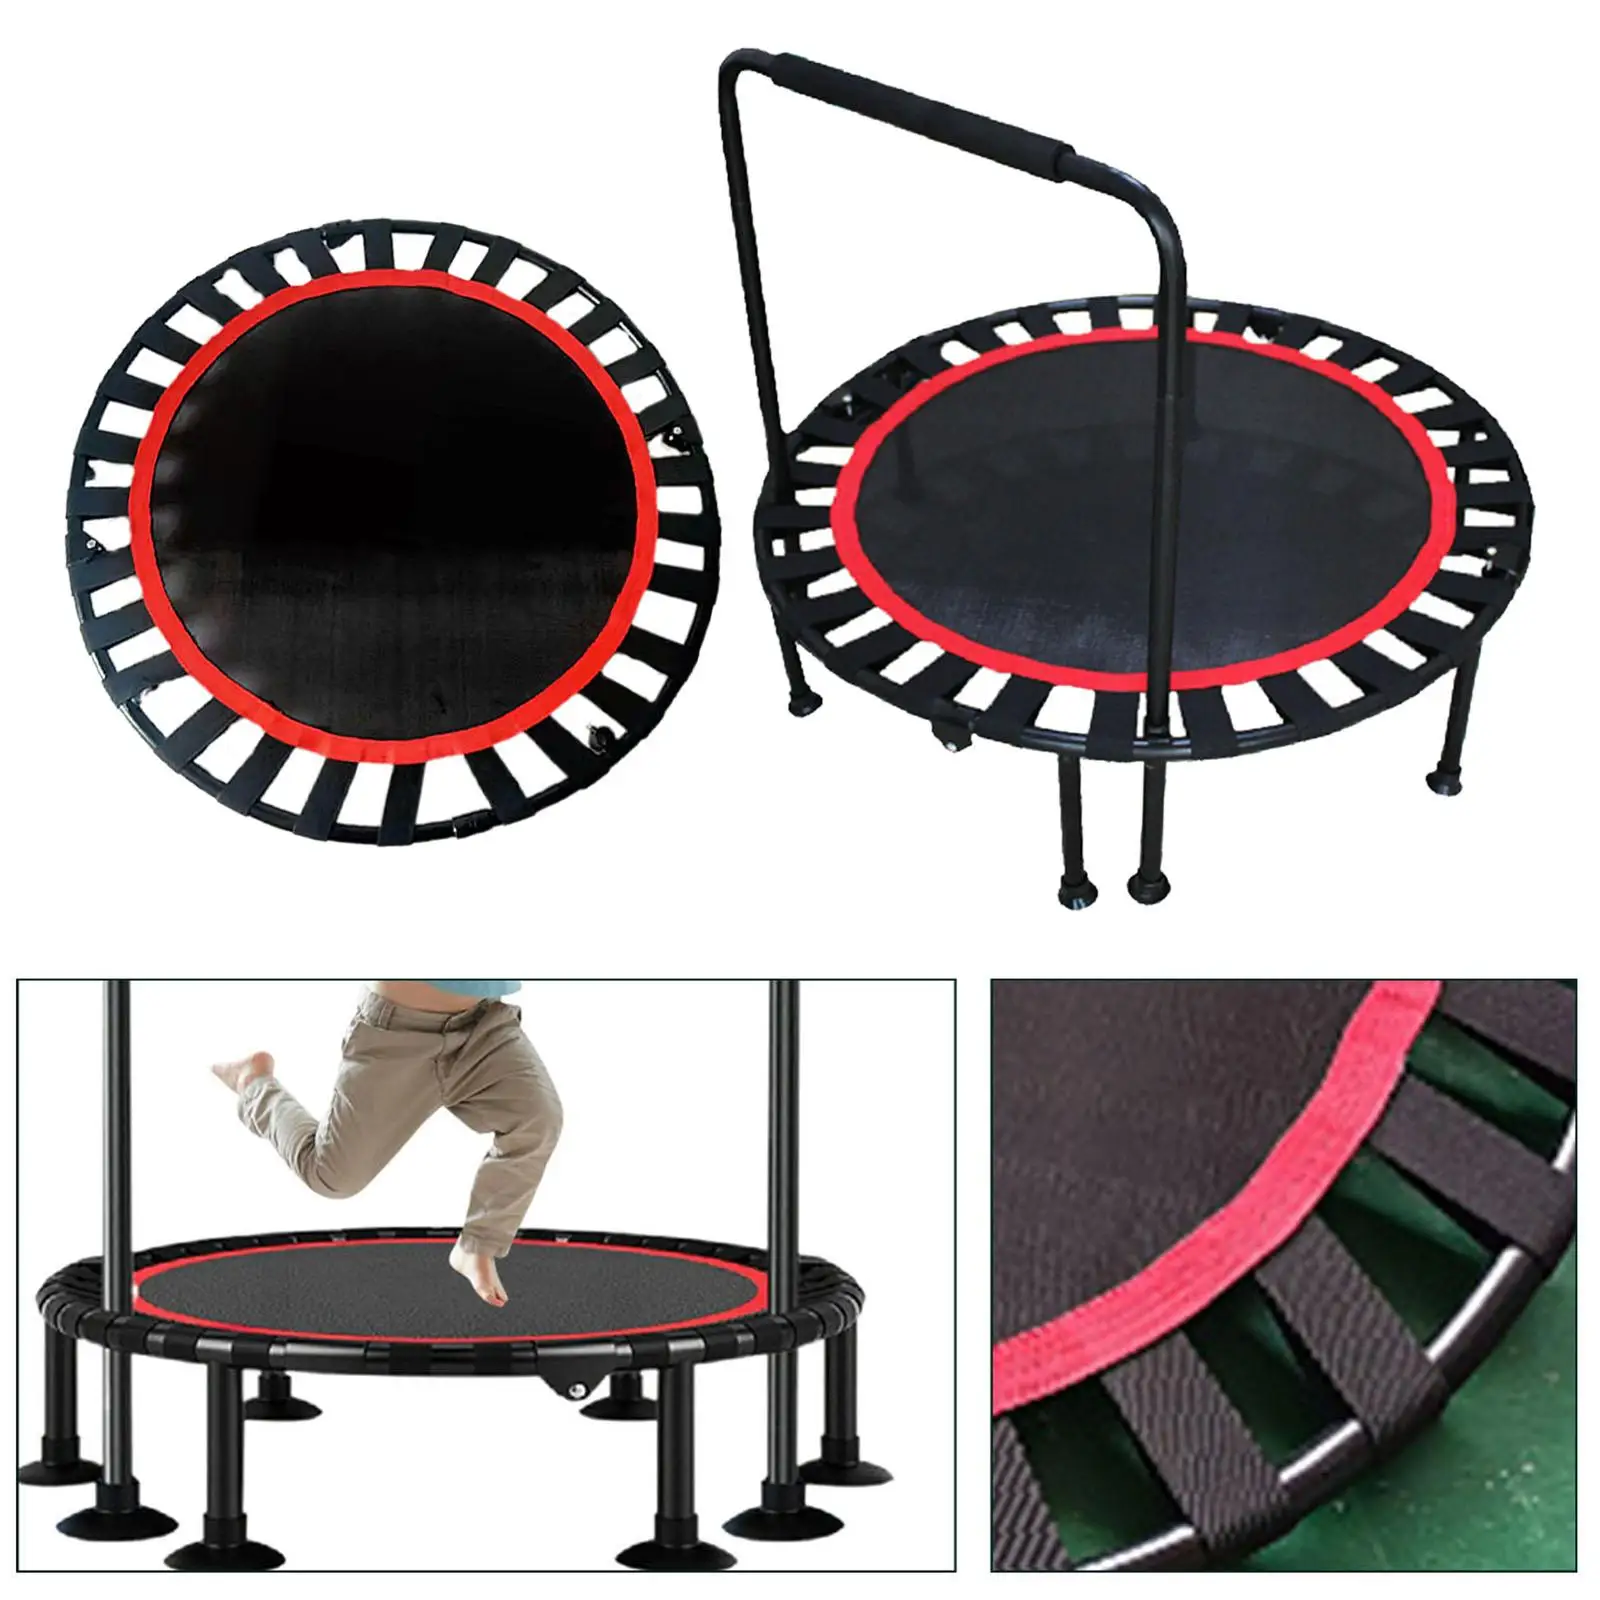 Premium Jumping Mat Long Lasting Birthday Gifts Play Exercise Safety Toy Trampoline for Kids Boy Girl Children Yard Toddler